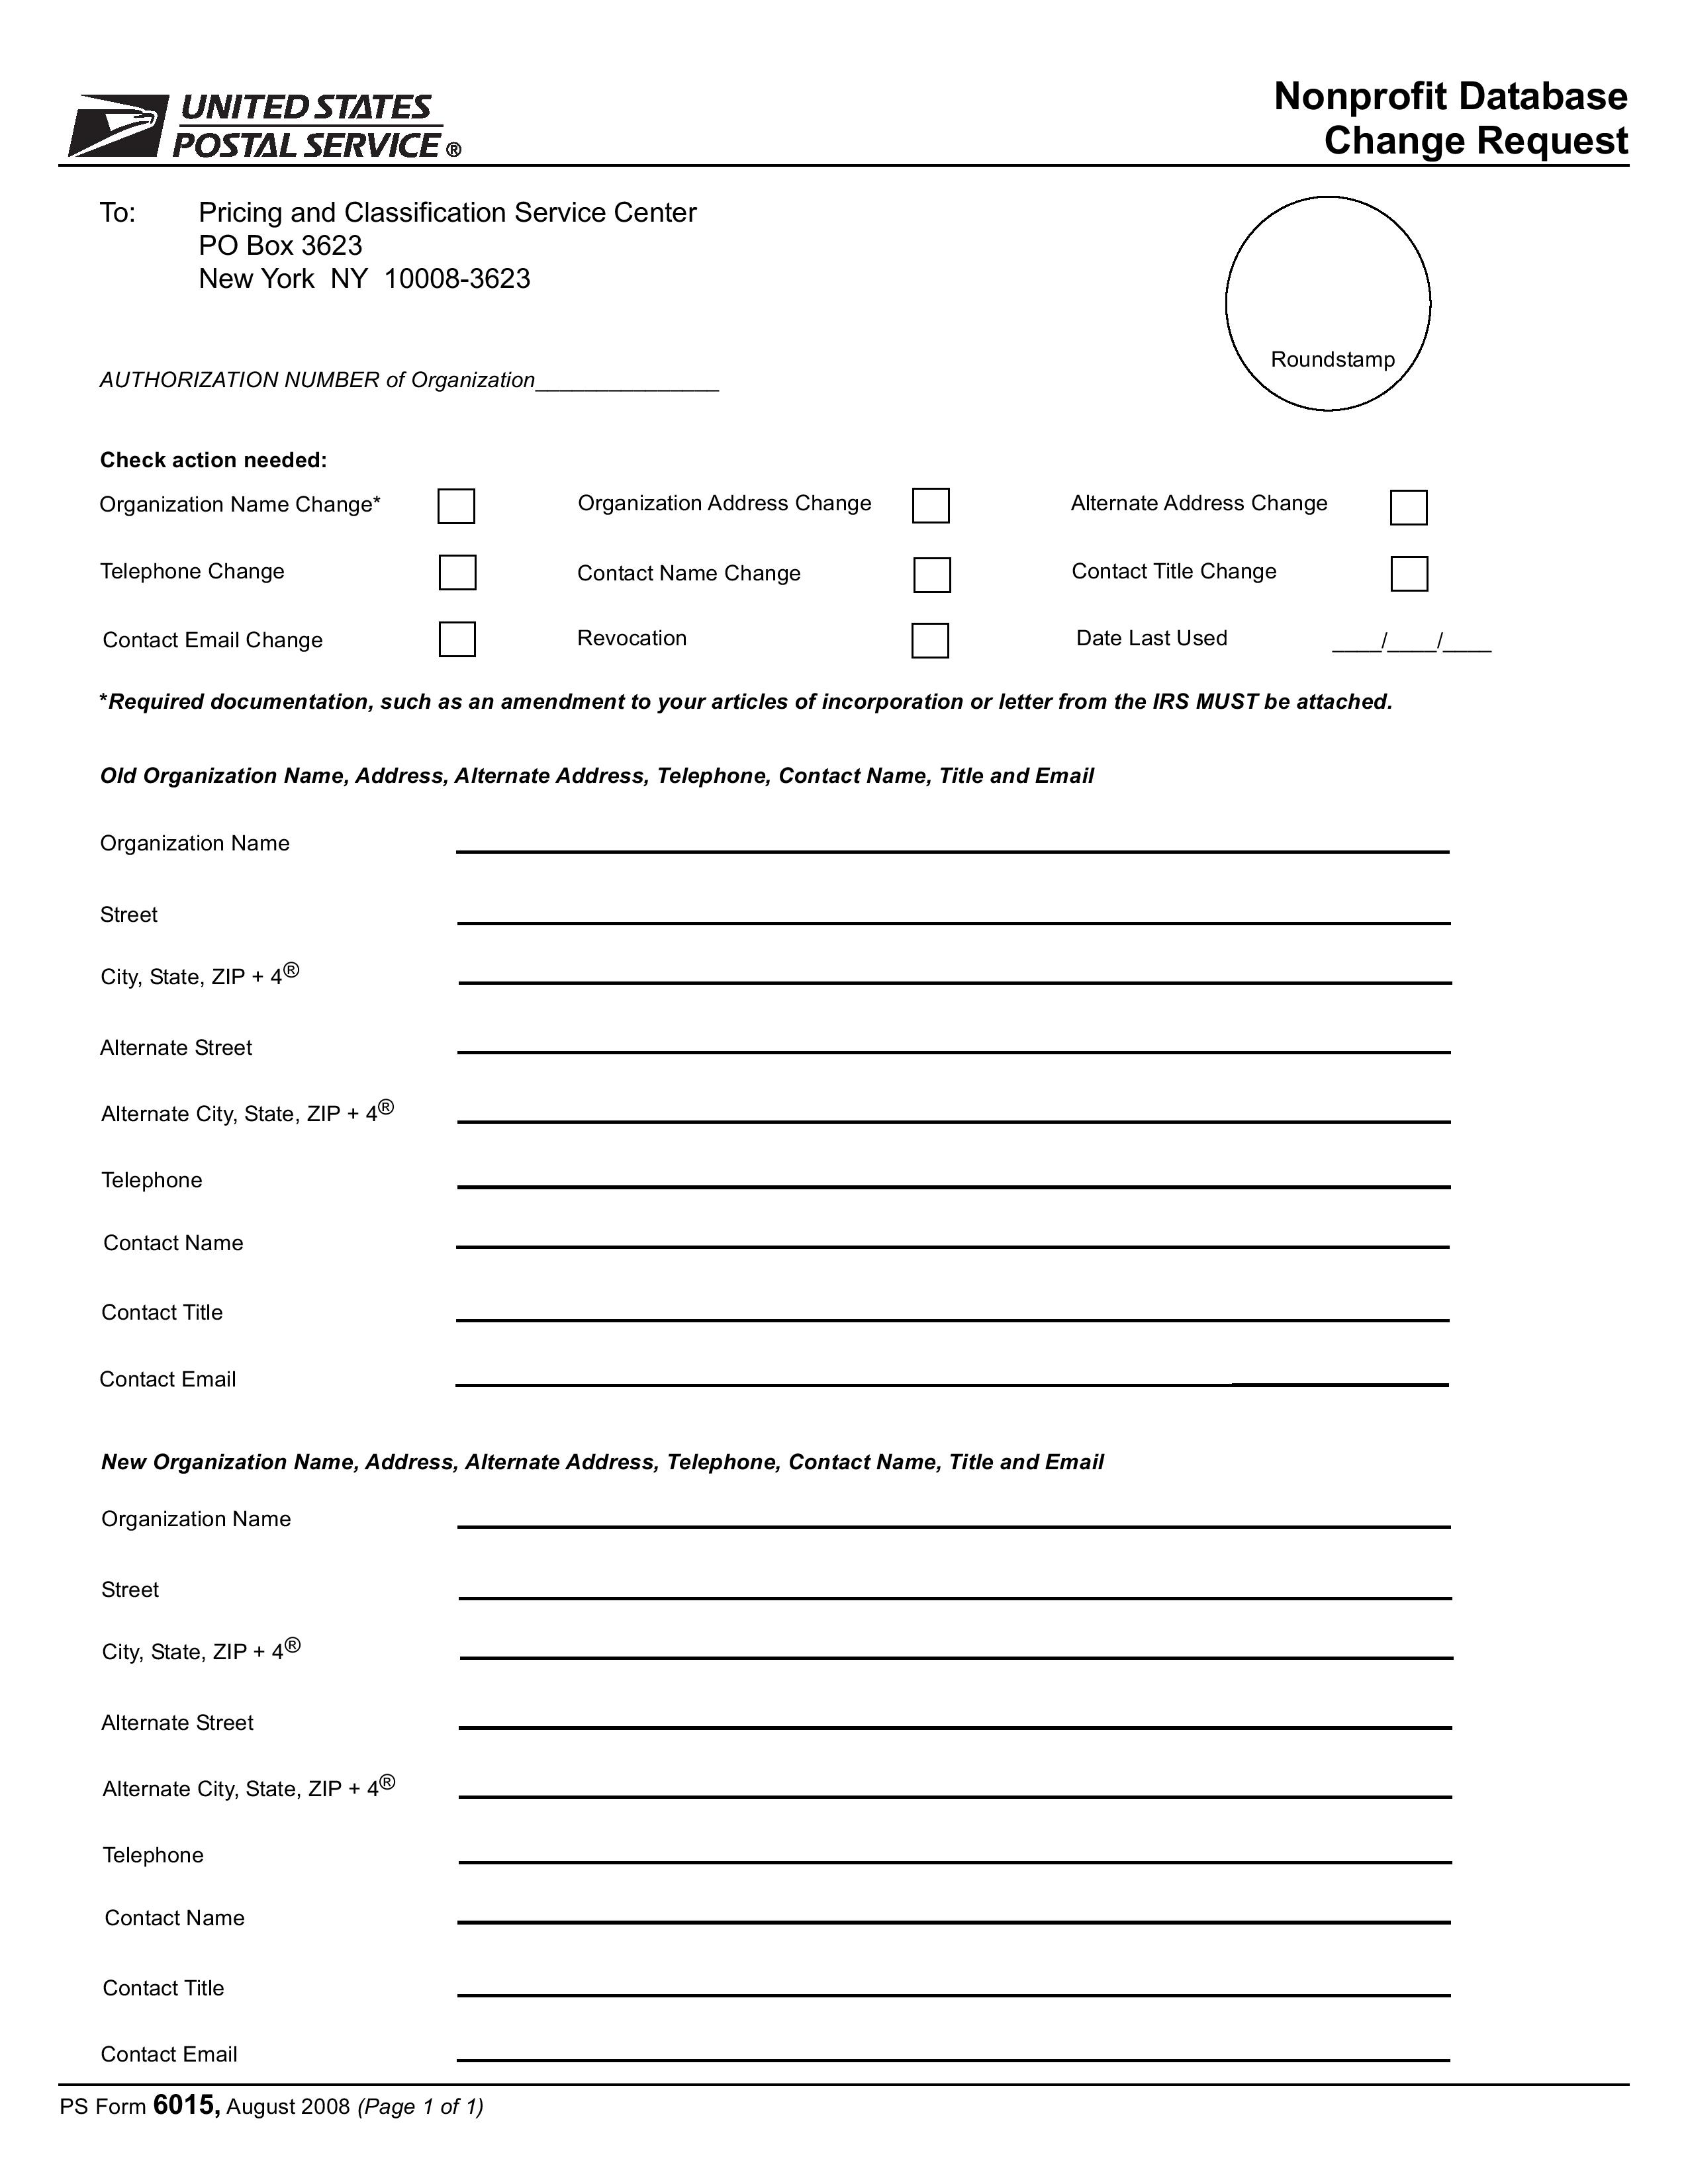 PS Form 6015